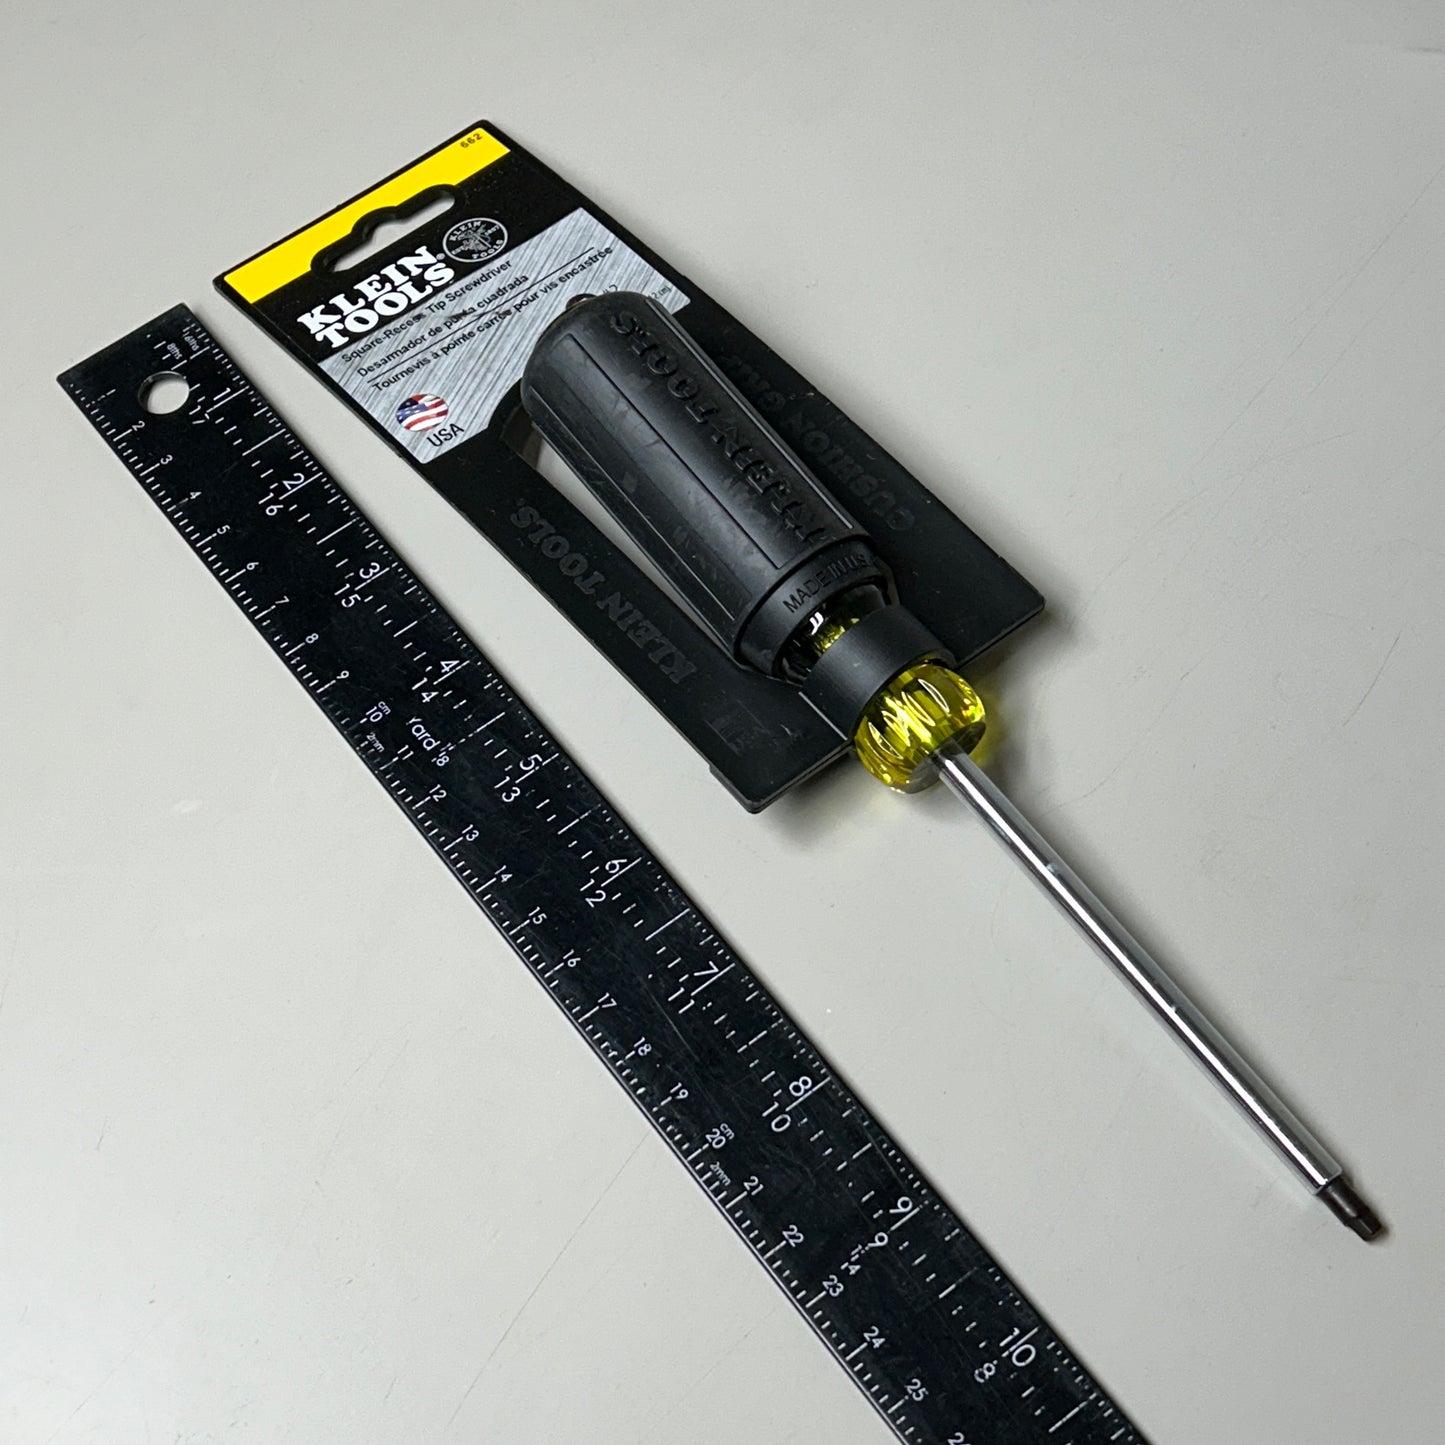 KLEIN TOOLS 3-PK! Square Screwdriver with 4-Inch Round Shank 662 (New)